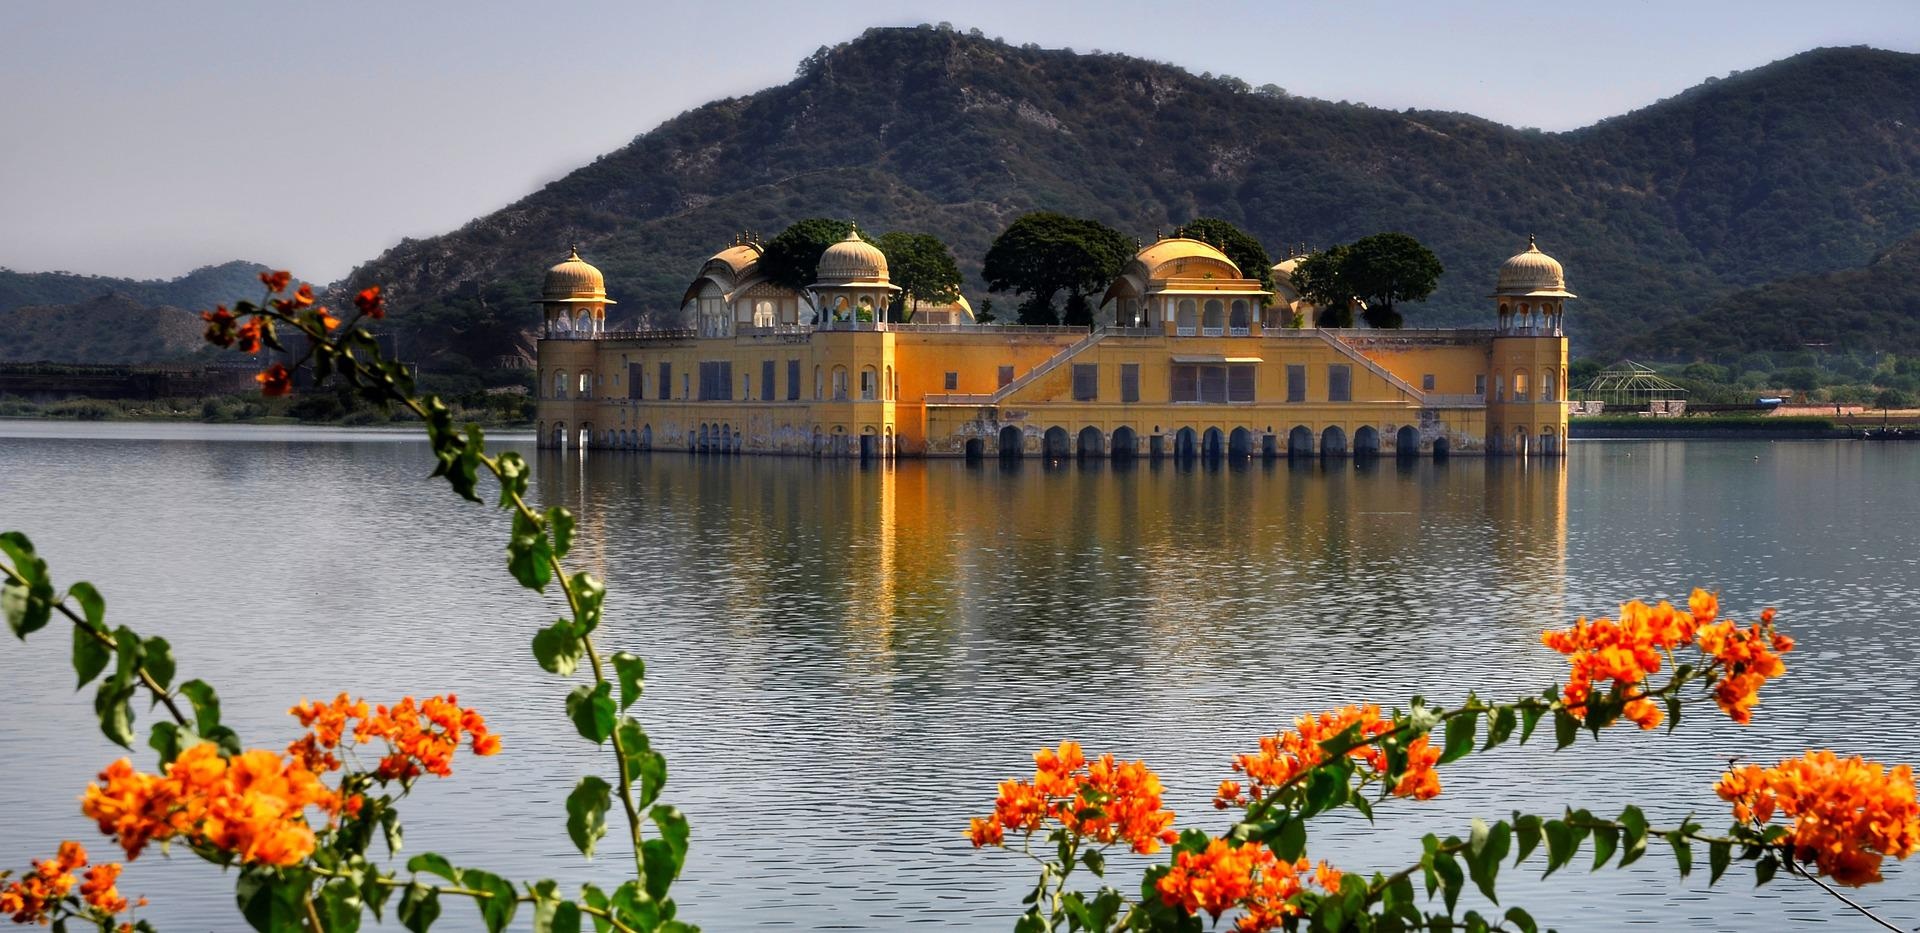 tourhub | Discover Activities | Agra and Jaipur 3 Days Discovery from Delhi 